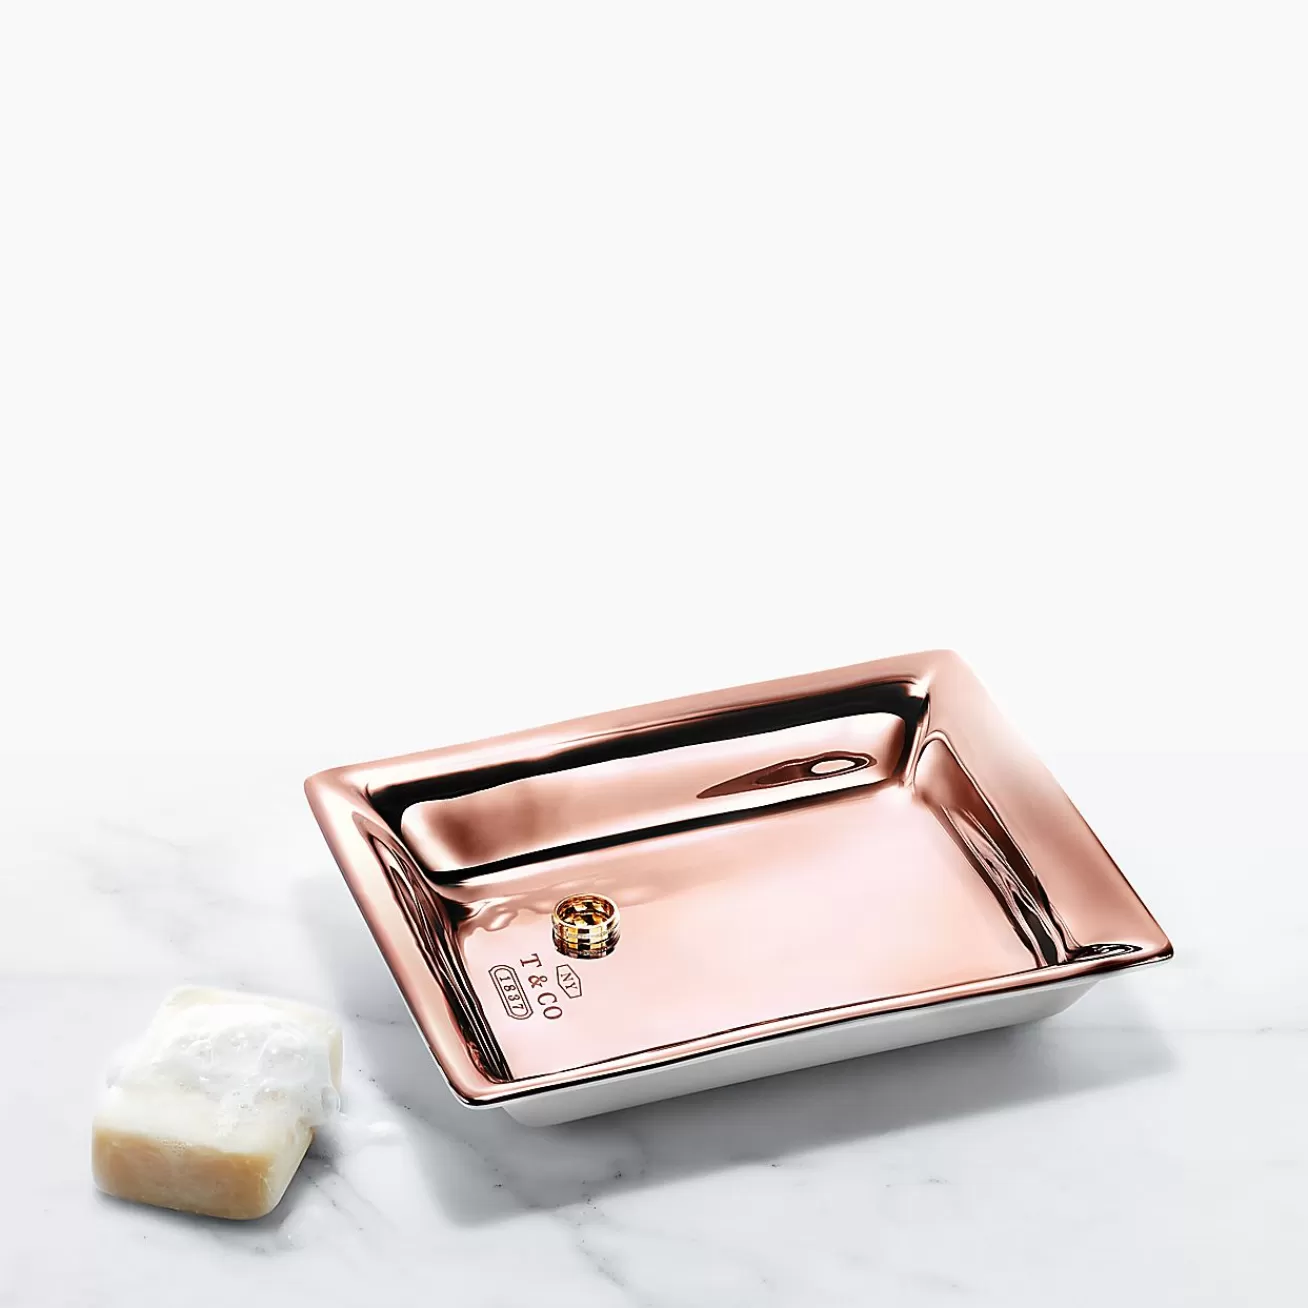 Tiffany & Co. Vide poche in porcelain with a rose gold hand-painted finish. | ^ The Home | Housewarming Gifts